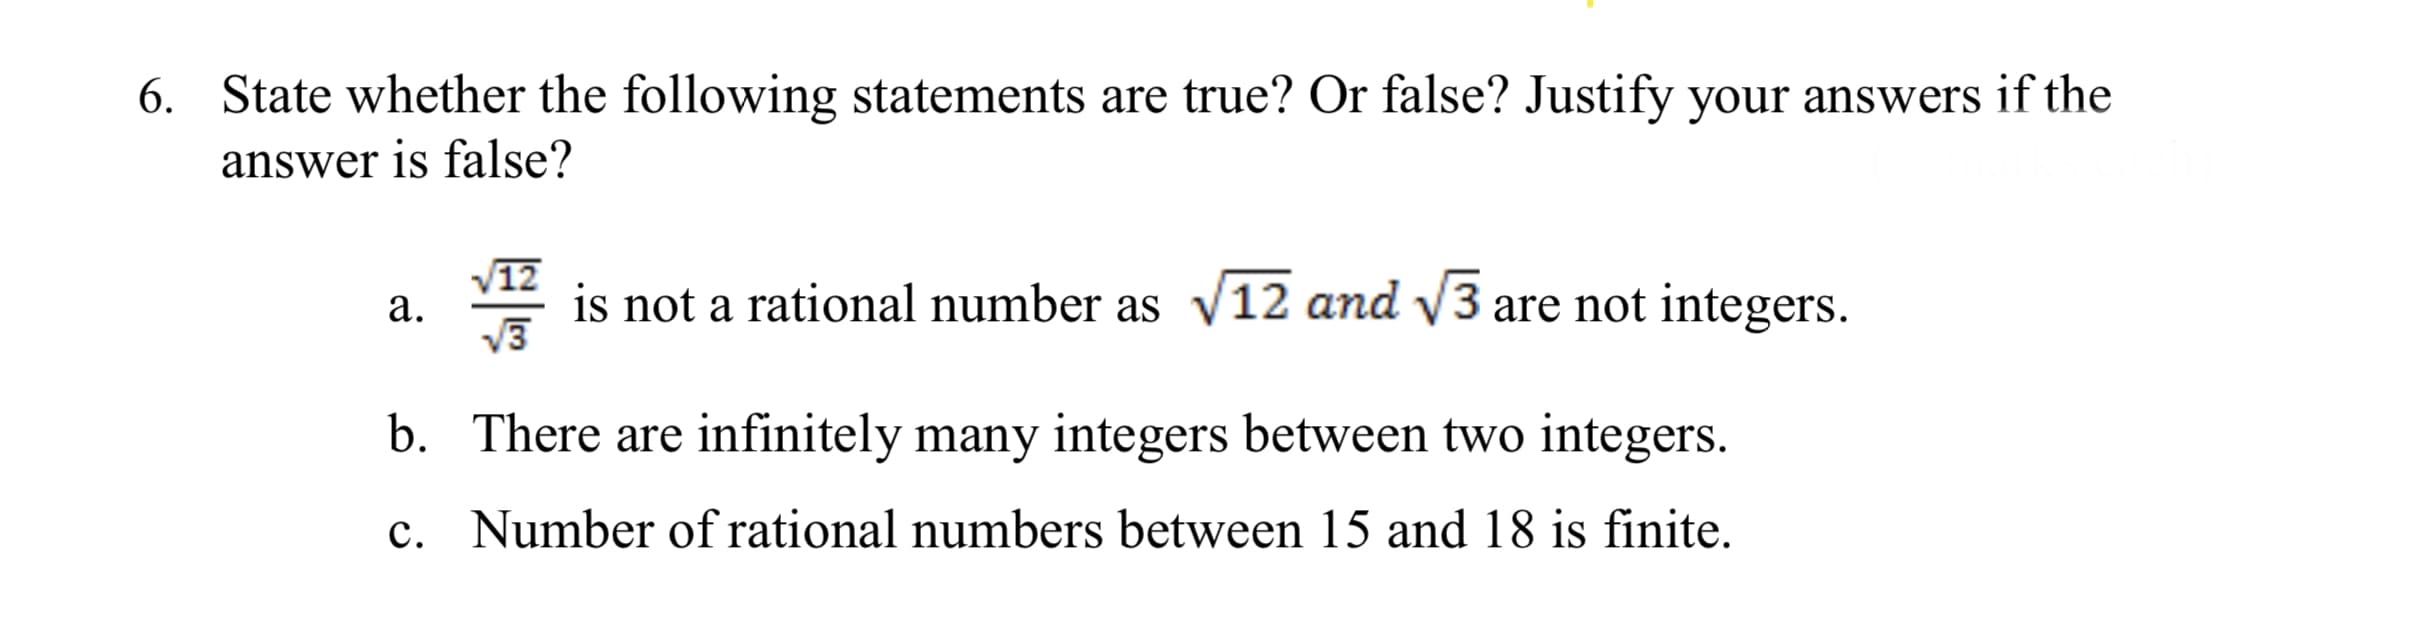 6. State whether the following statements are true? Or false? Justify your answers if the
answer is false?
V12
а.
is not a rational number as v12 and V3 are not integers.
b. There are infinitely many integers between two integers.
c. Number of rational numbers between 15 and 18 is finite.
